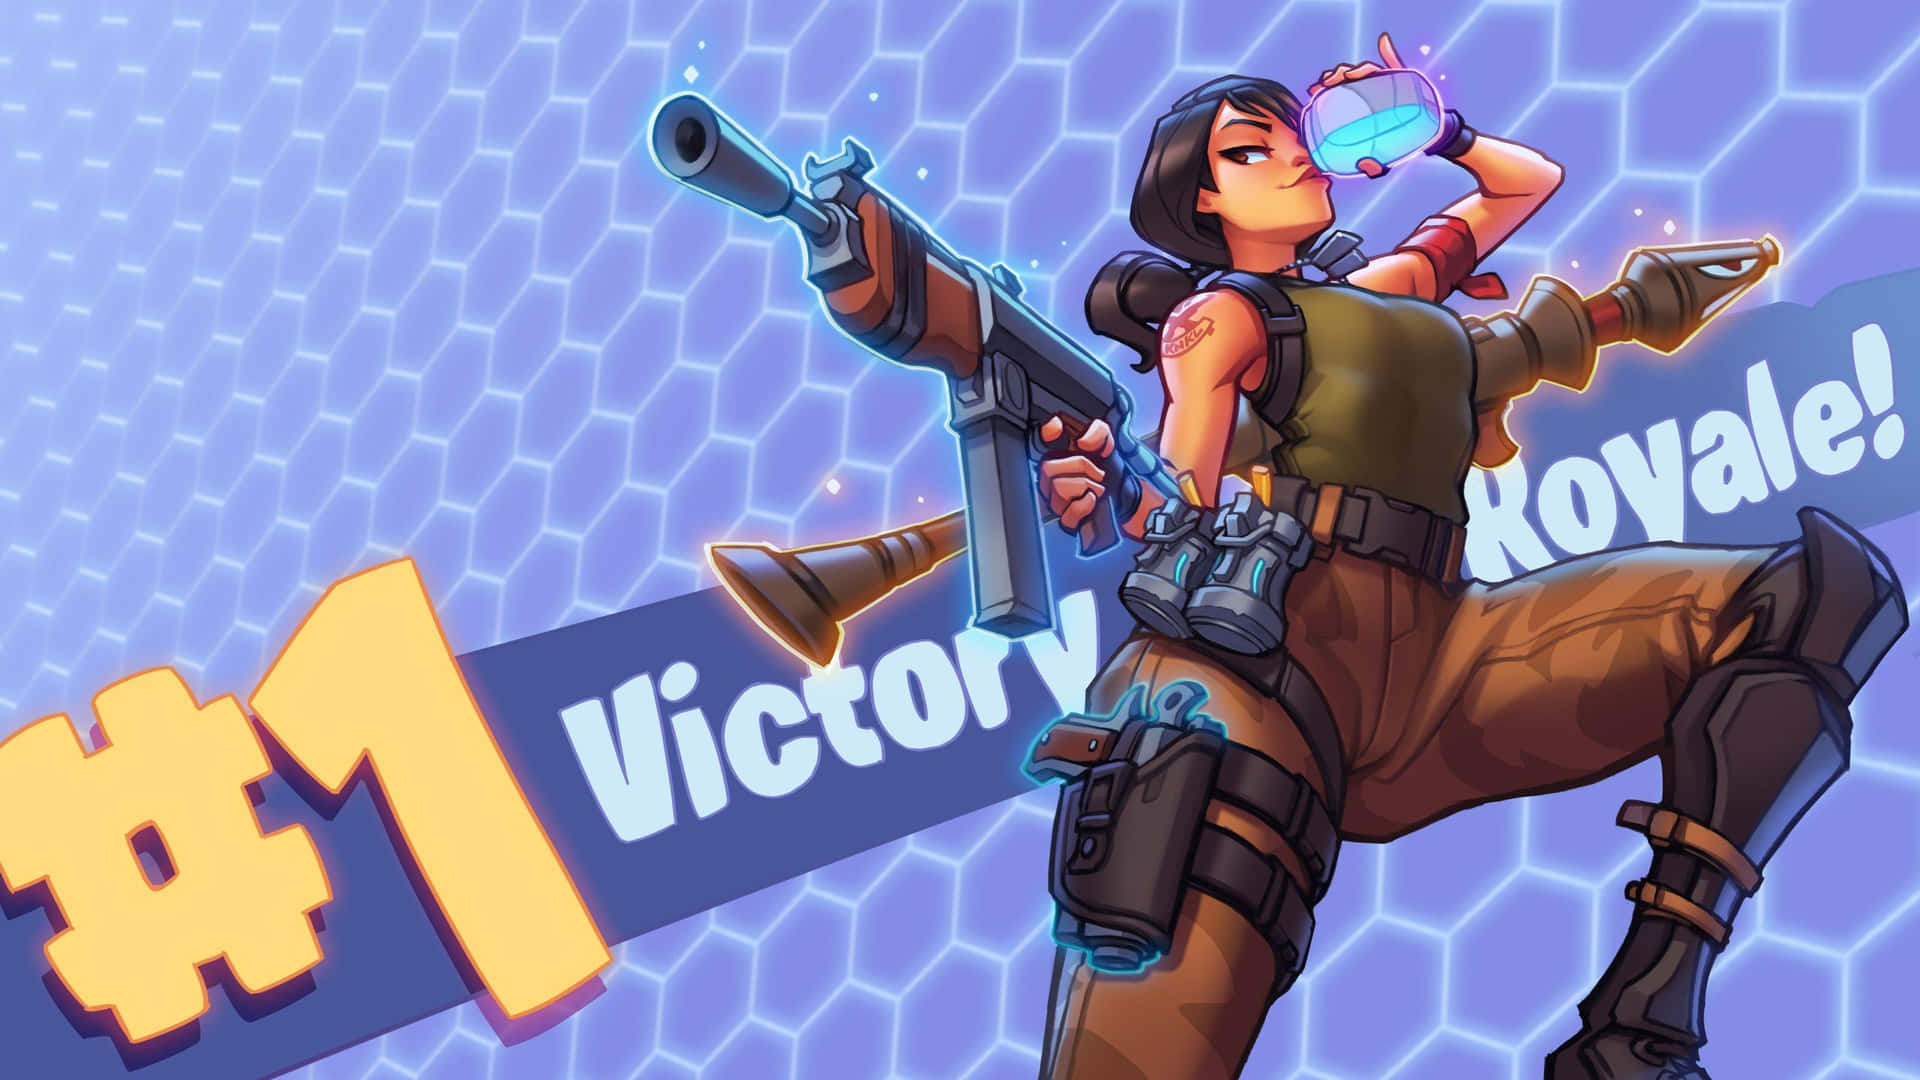 Victory Background